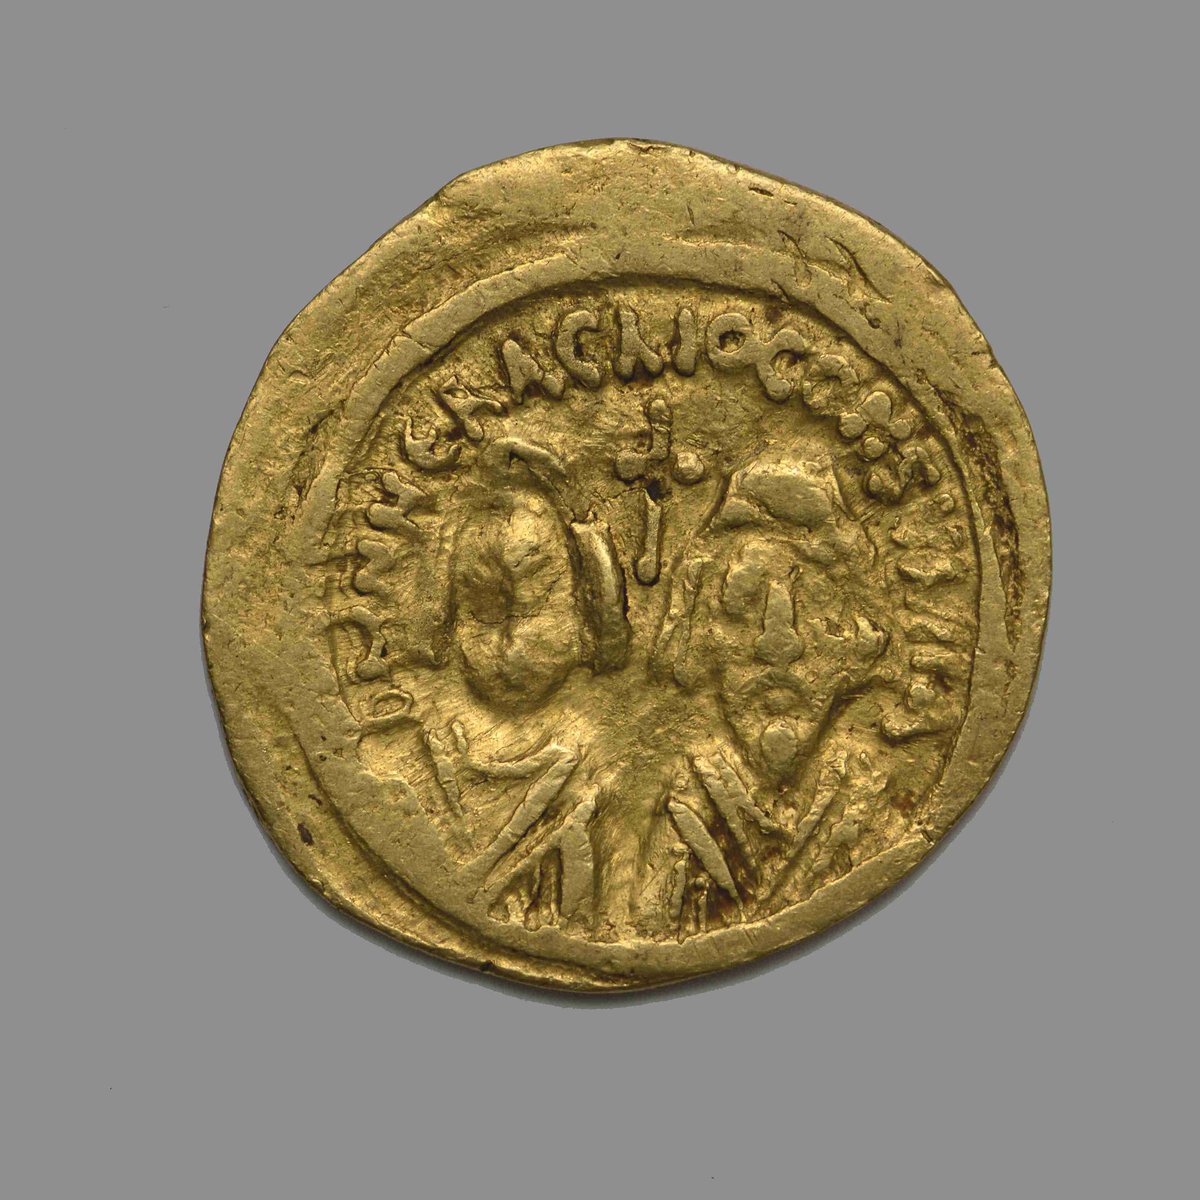 Instead, father and son usurped the imperial privilege of minting coins and appeared as consuls. This measure clearly communicated the ambition for the imperial throne - without taking the risk of prematurely assuming the title of Augustus.